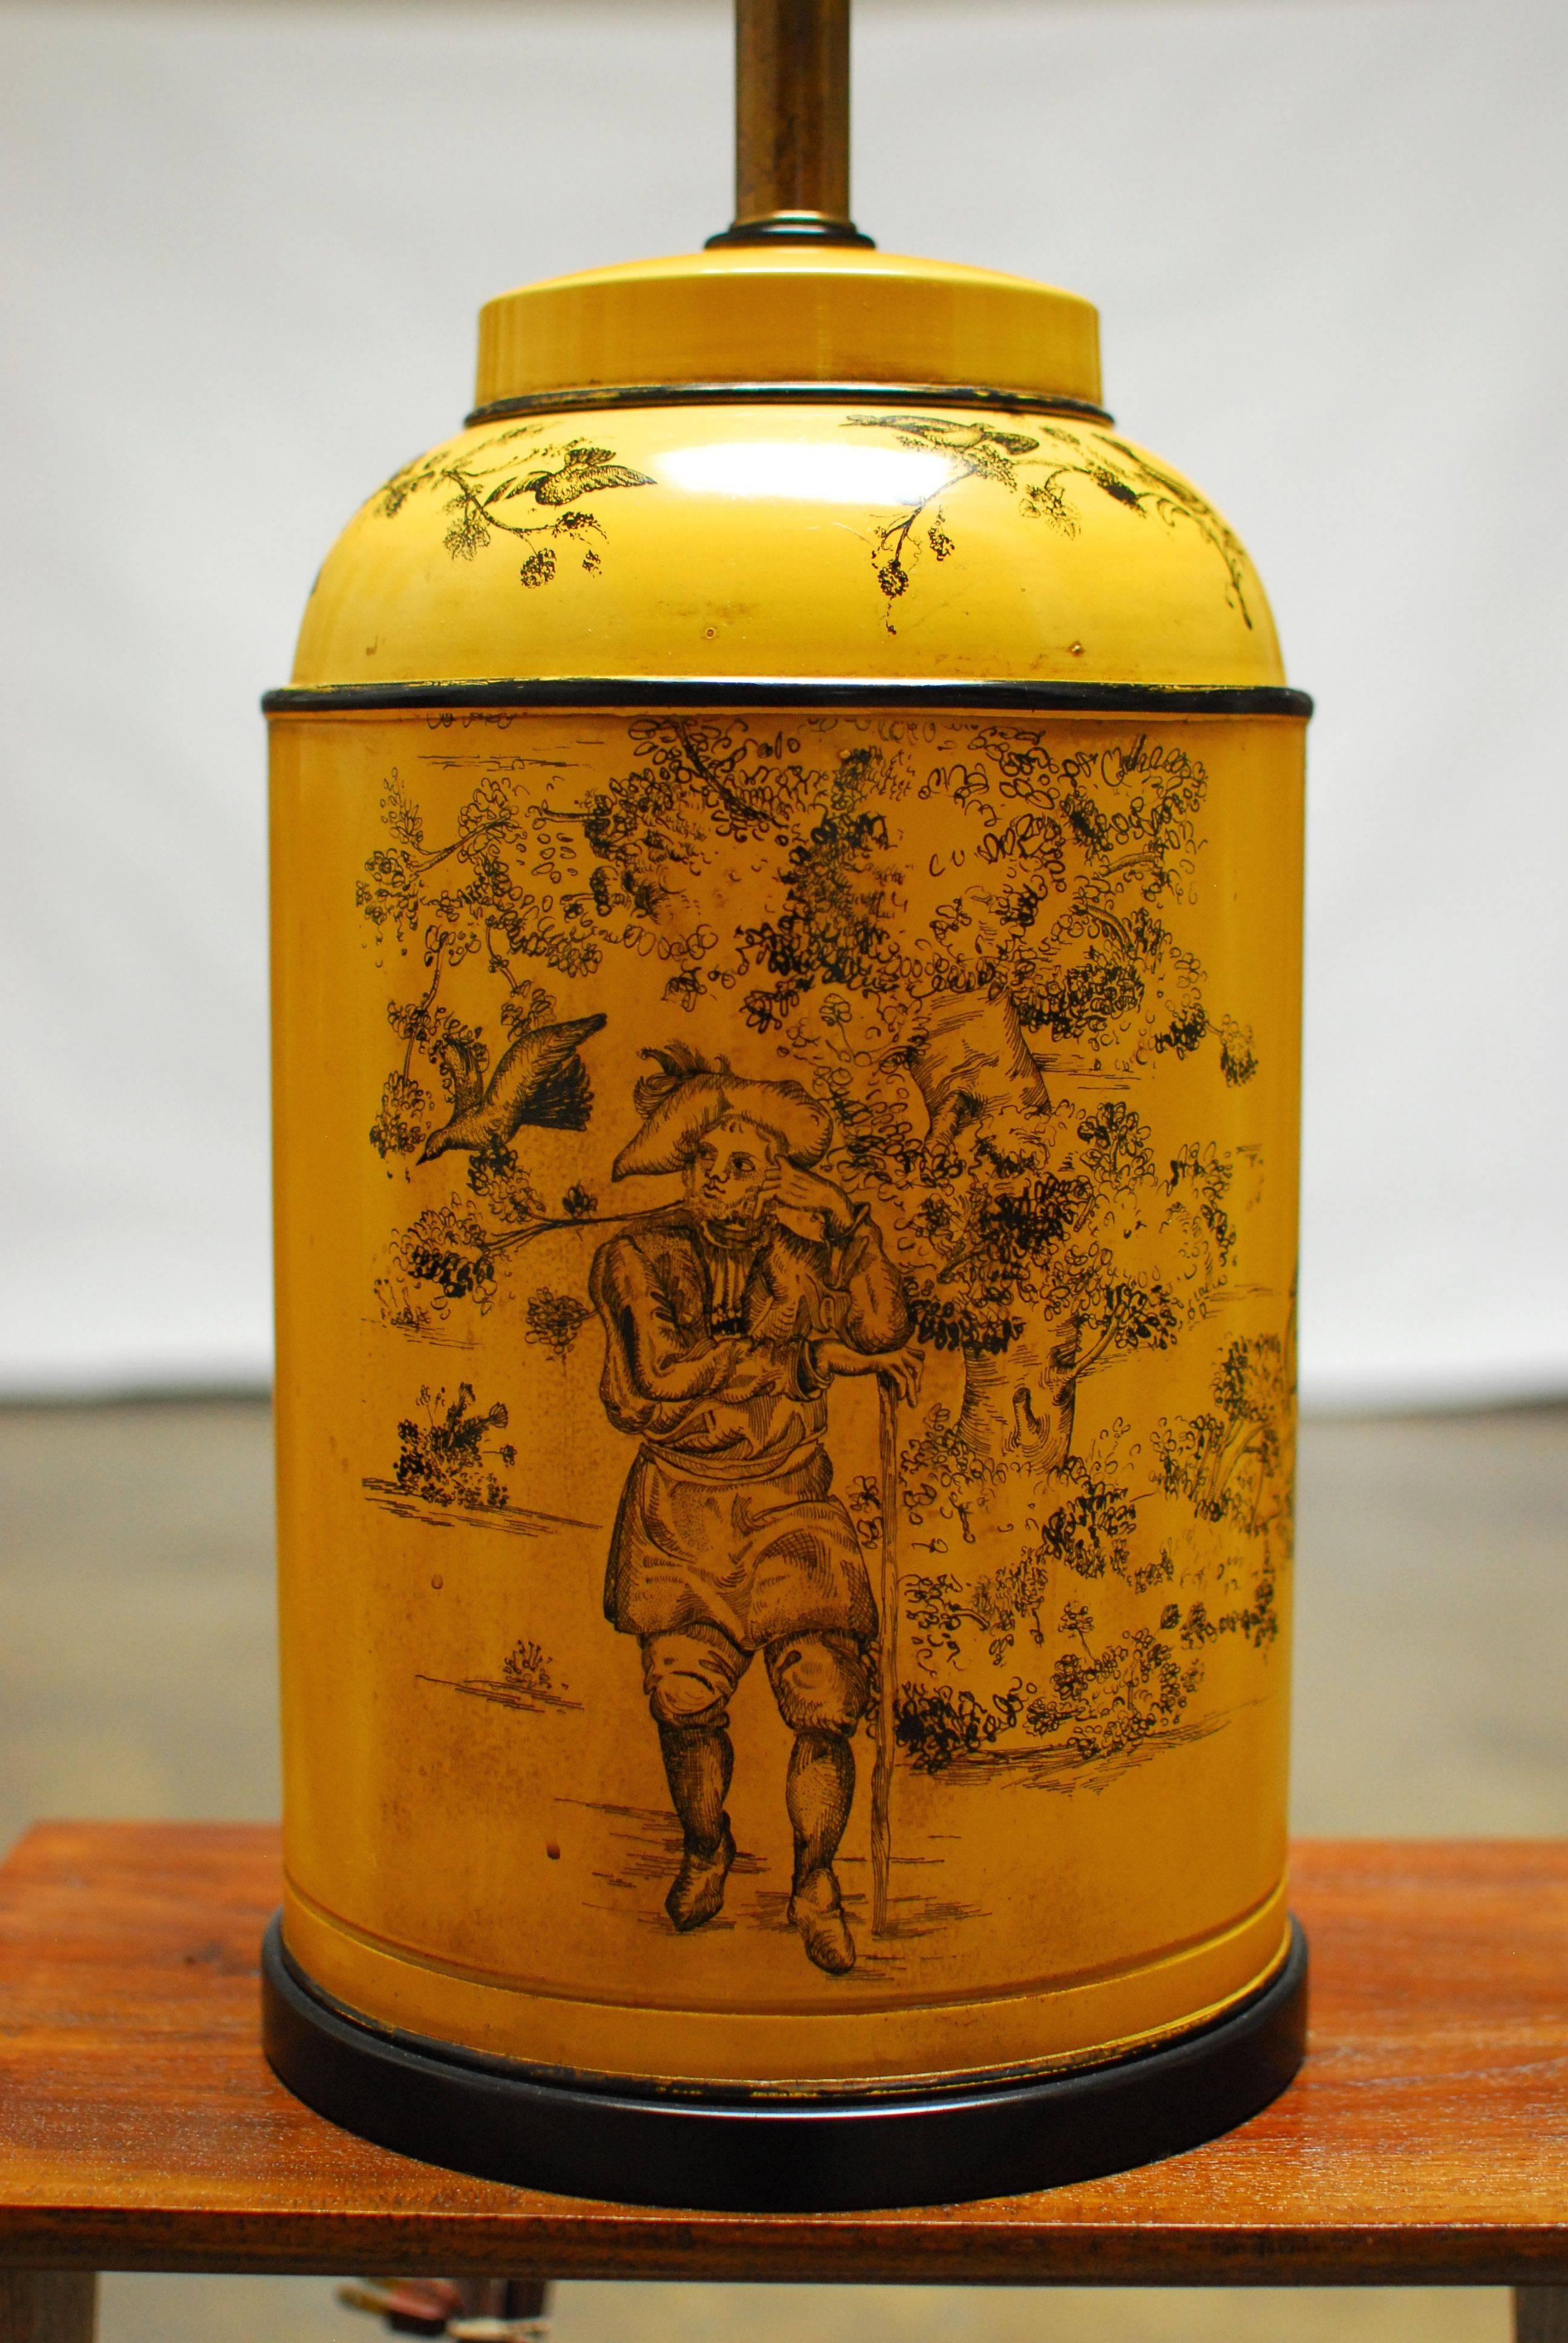 French Provincial style tea canister tole lamp finished in mustard yellow with French country scenes. Made by Frederick Cooper of Chicago with brass metal hardware. Sits on a round conforming wood base and includes a matte black finial and